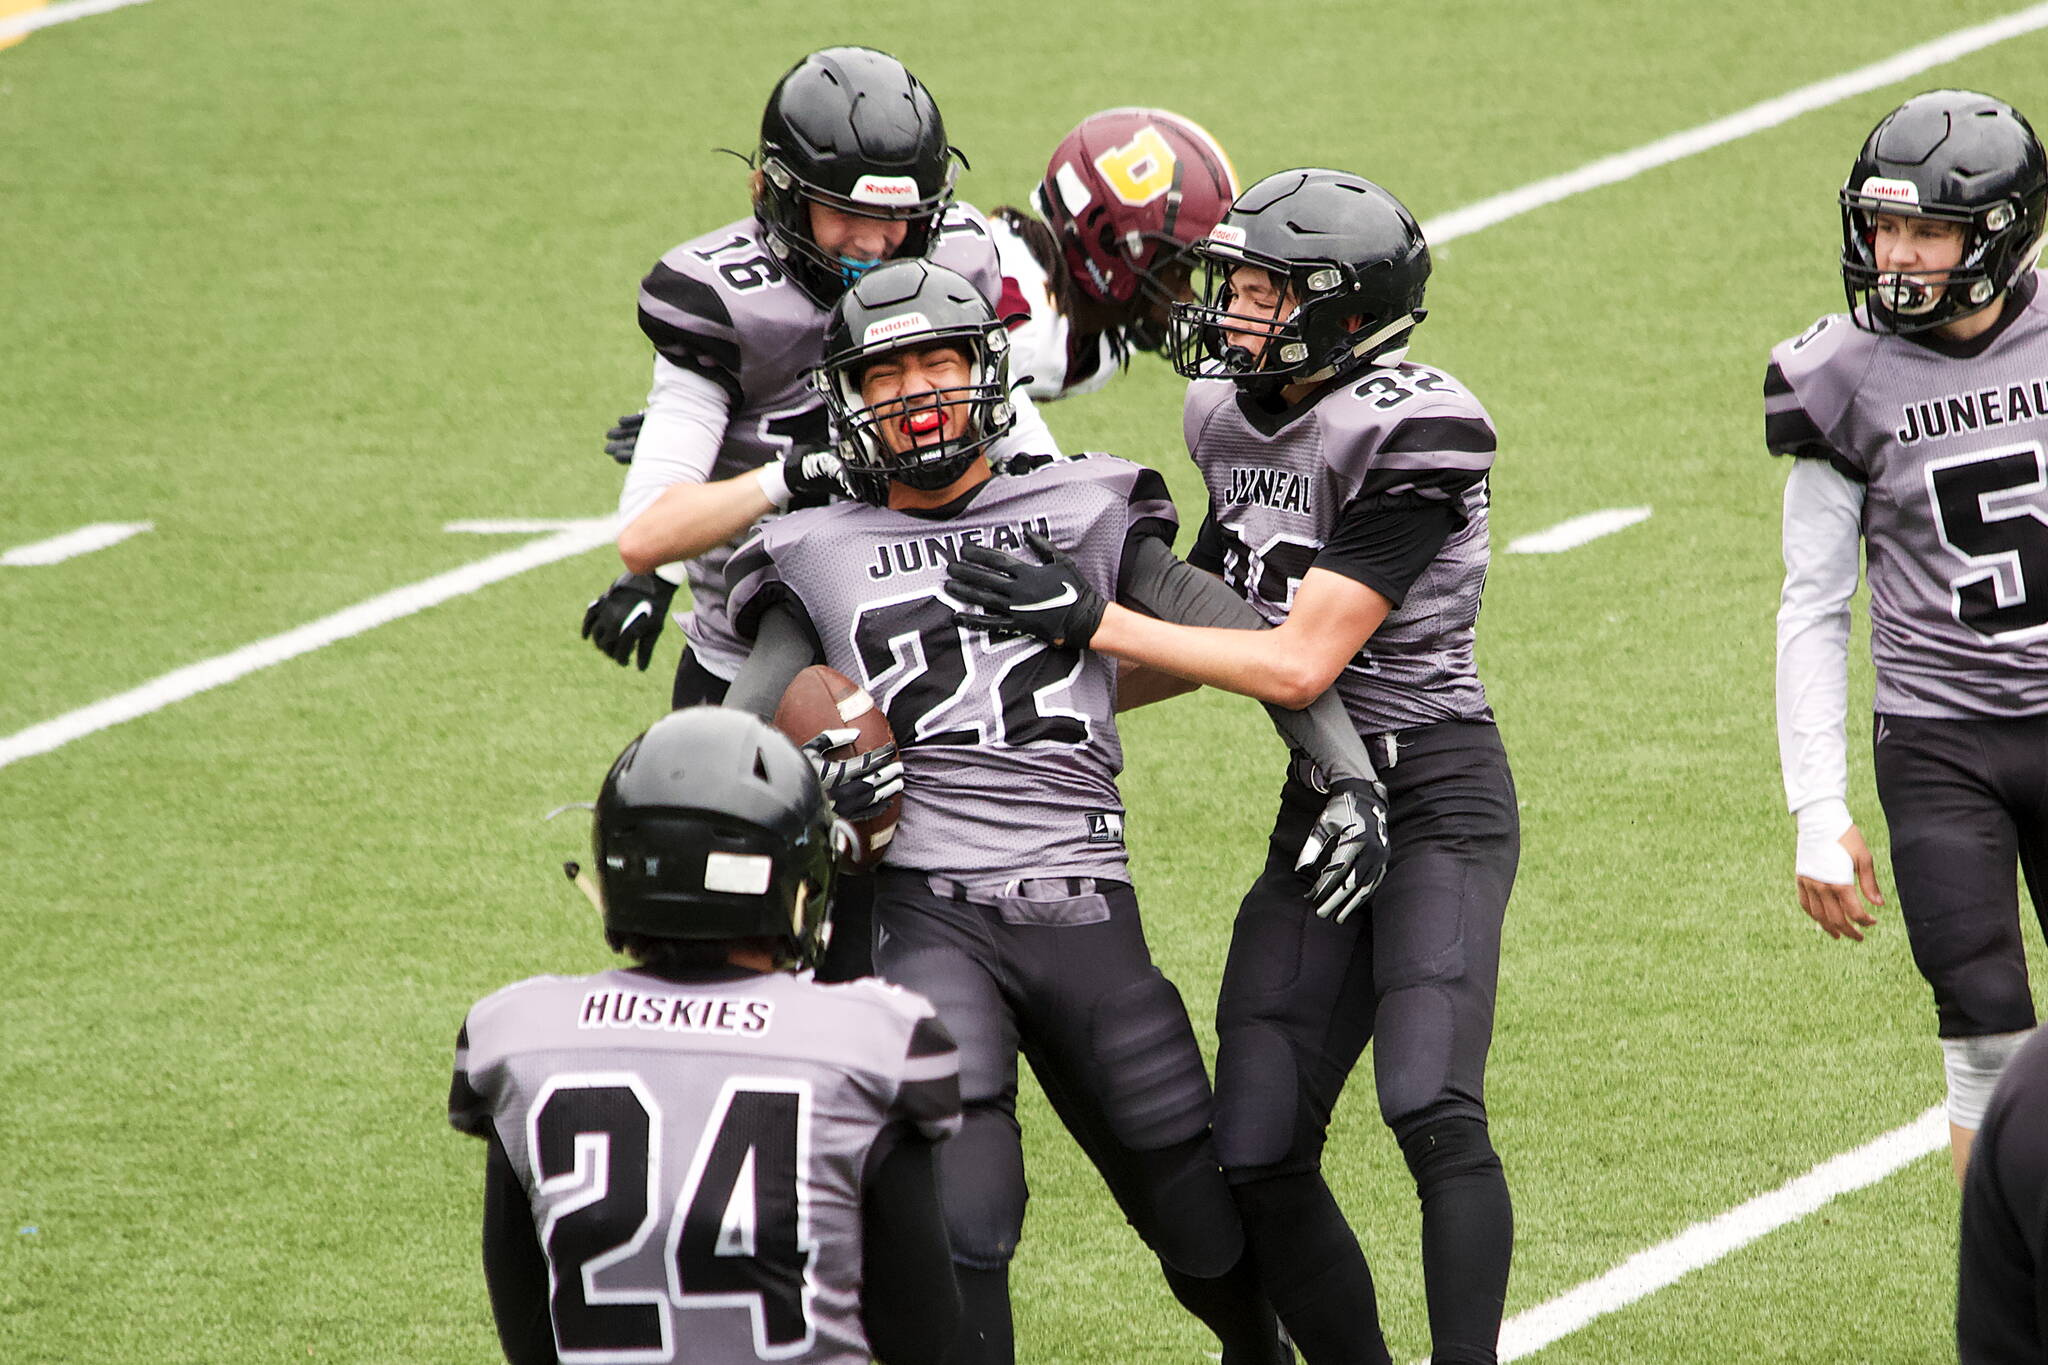 Anthony Garcia (22) celebrates with Juneau Huskies teammates after intercepting a pass with less than two minutes left in the third quarter against the Dimond High School Lynx on Saturday at Adair-Kennedy Field. The interception sparked a rapid 19-point rally by the Huskies, who were trailing 32-14 at the time, as they took a 33-32 lead with about 10 minutes in the fourth quarter before going on to lose by a final score of 40-33. (Mark Sabbatini / Juneau Empire)